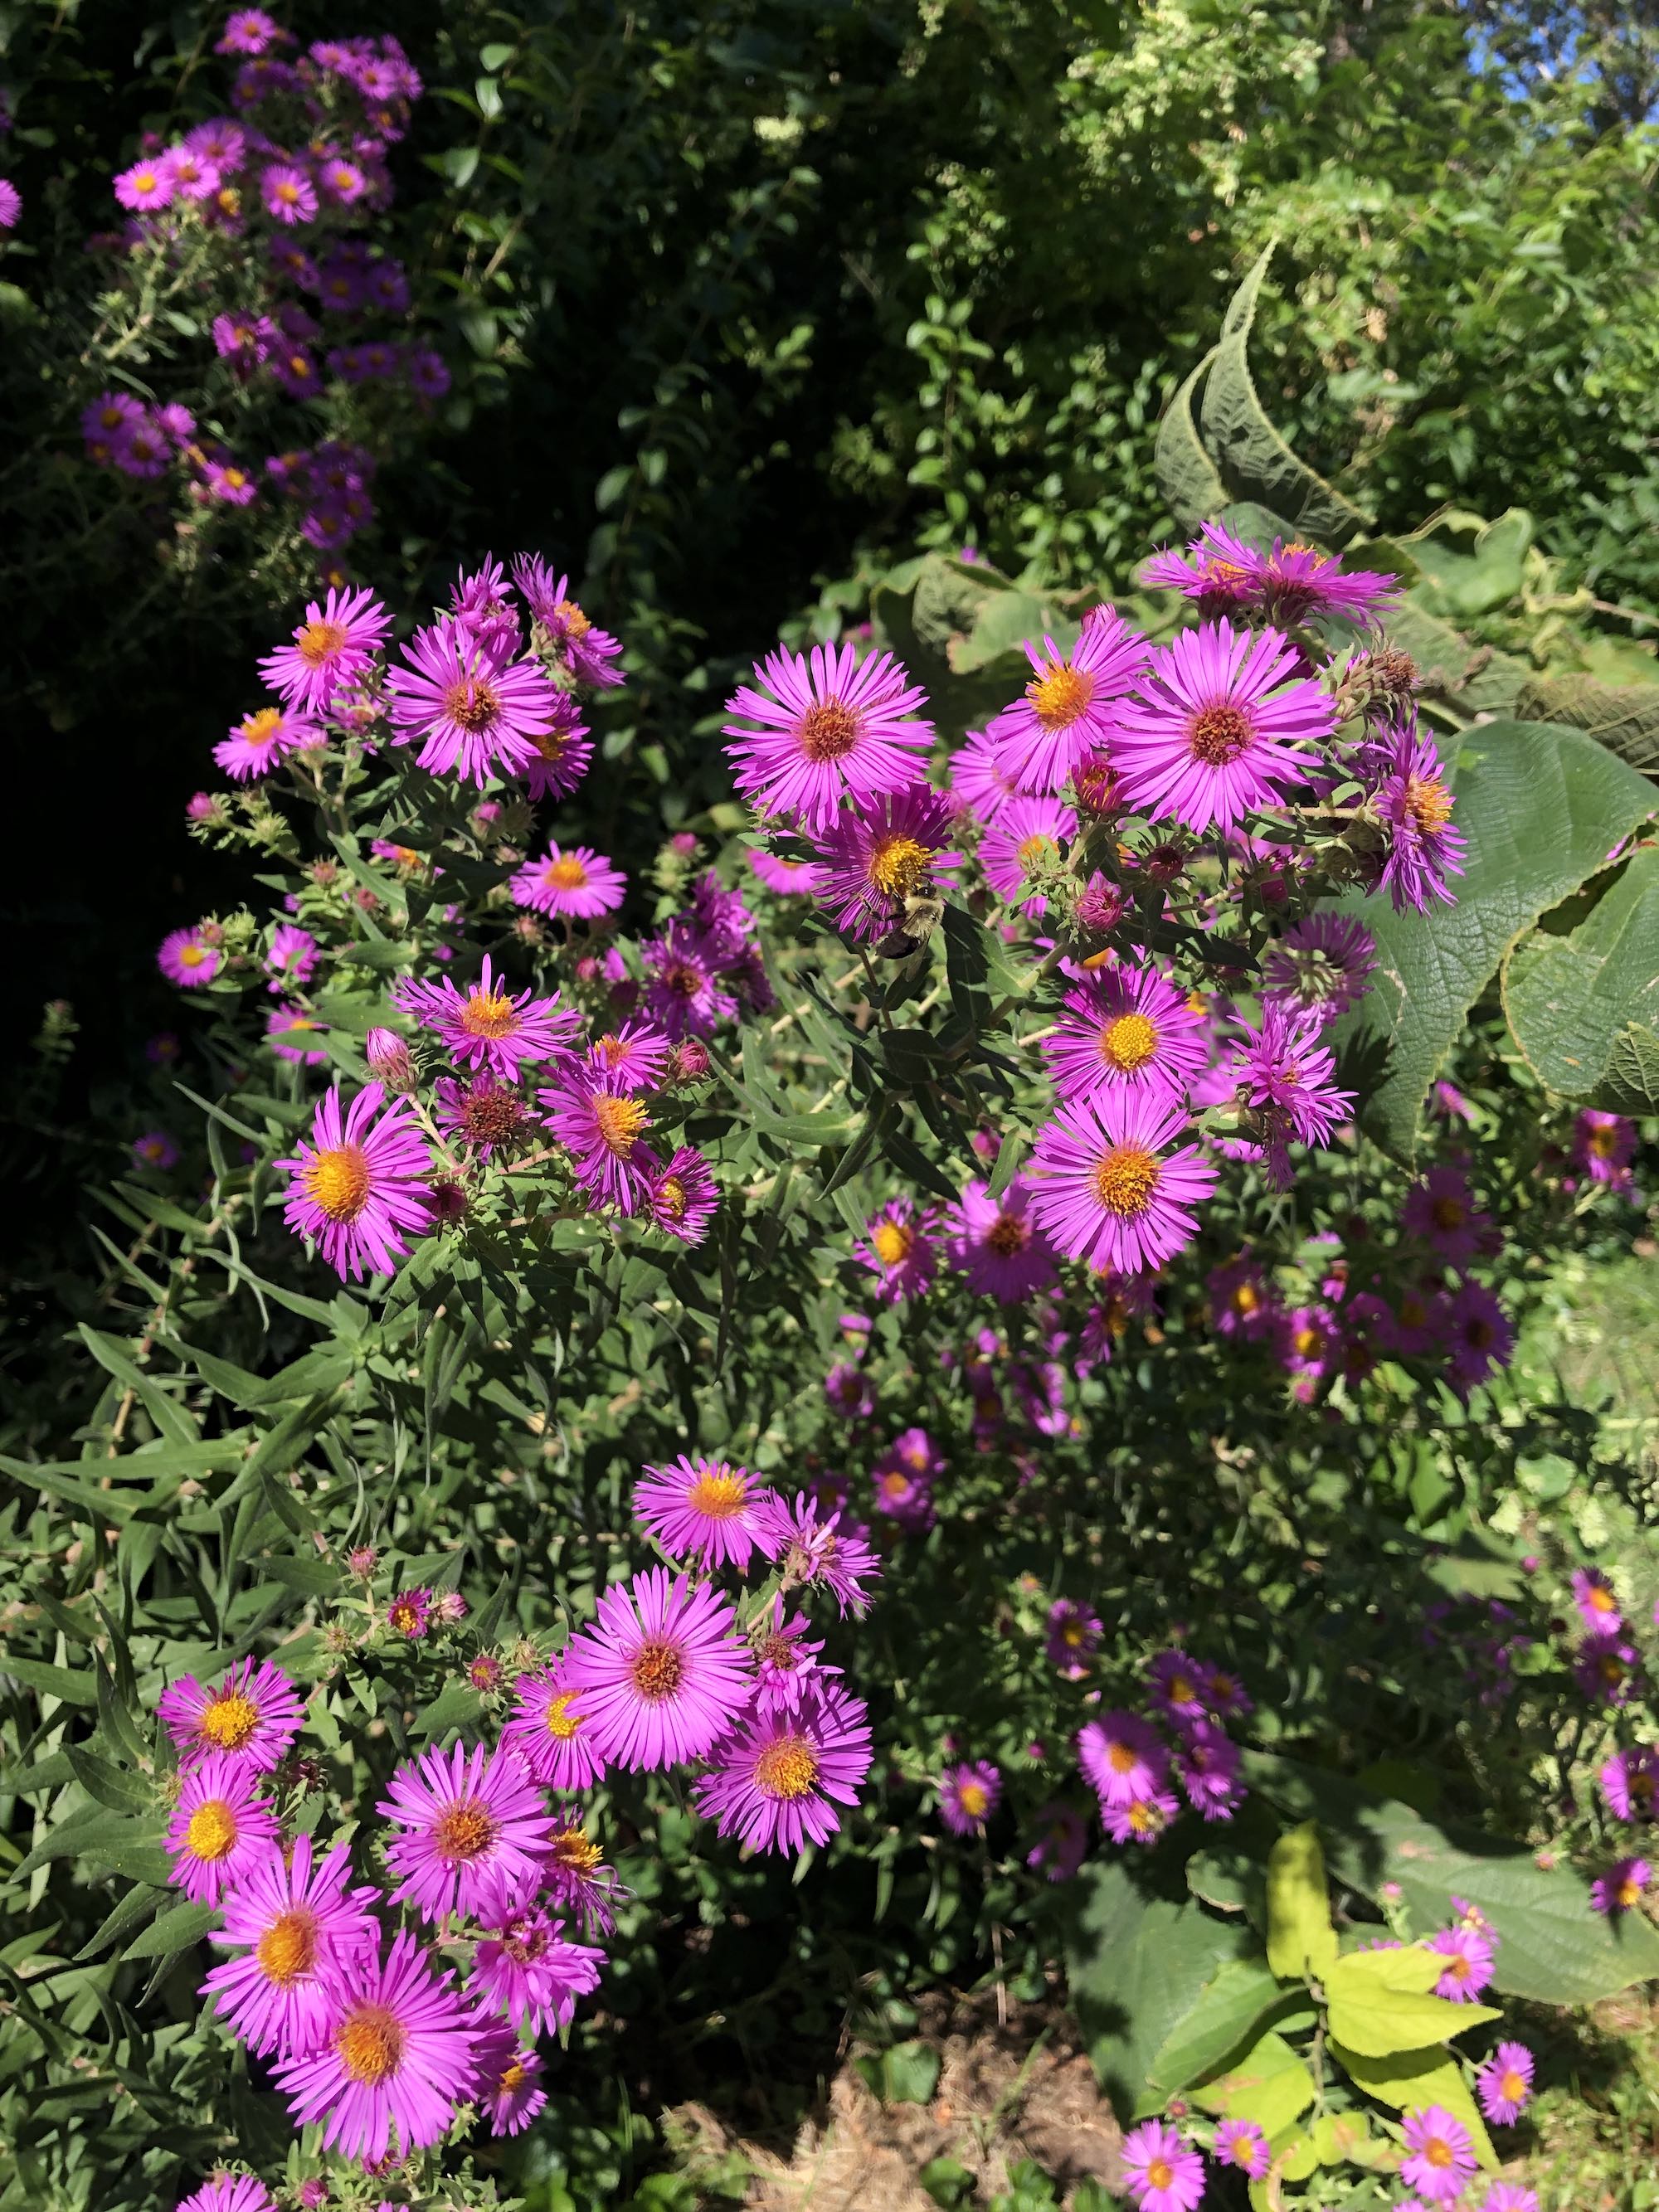 New England Aster on shore of Vilas Park Lagoon in Madison, Wisconsin on September 22, 2022.